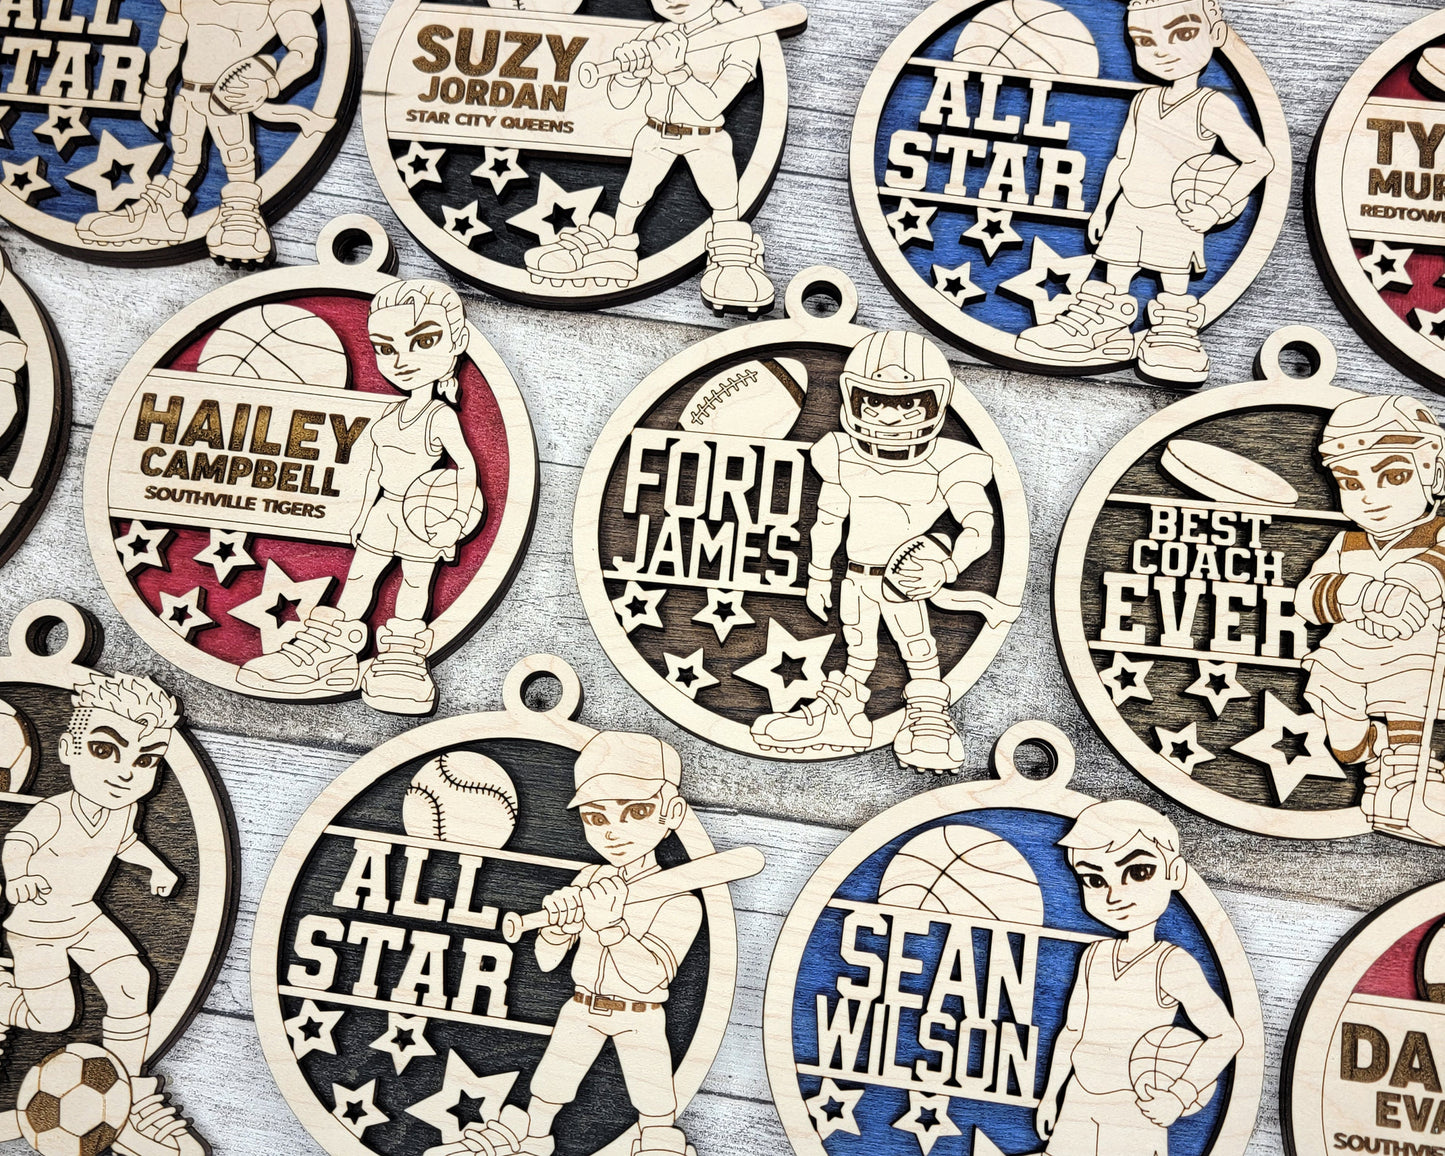 Stadium Series Animated Ornaments - 15 Sports with 14 Variations - SVG, PDF, AI File Download - Glowforge and Lightburn Tested